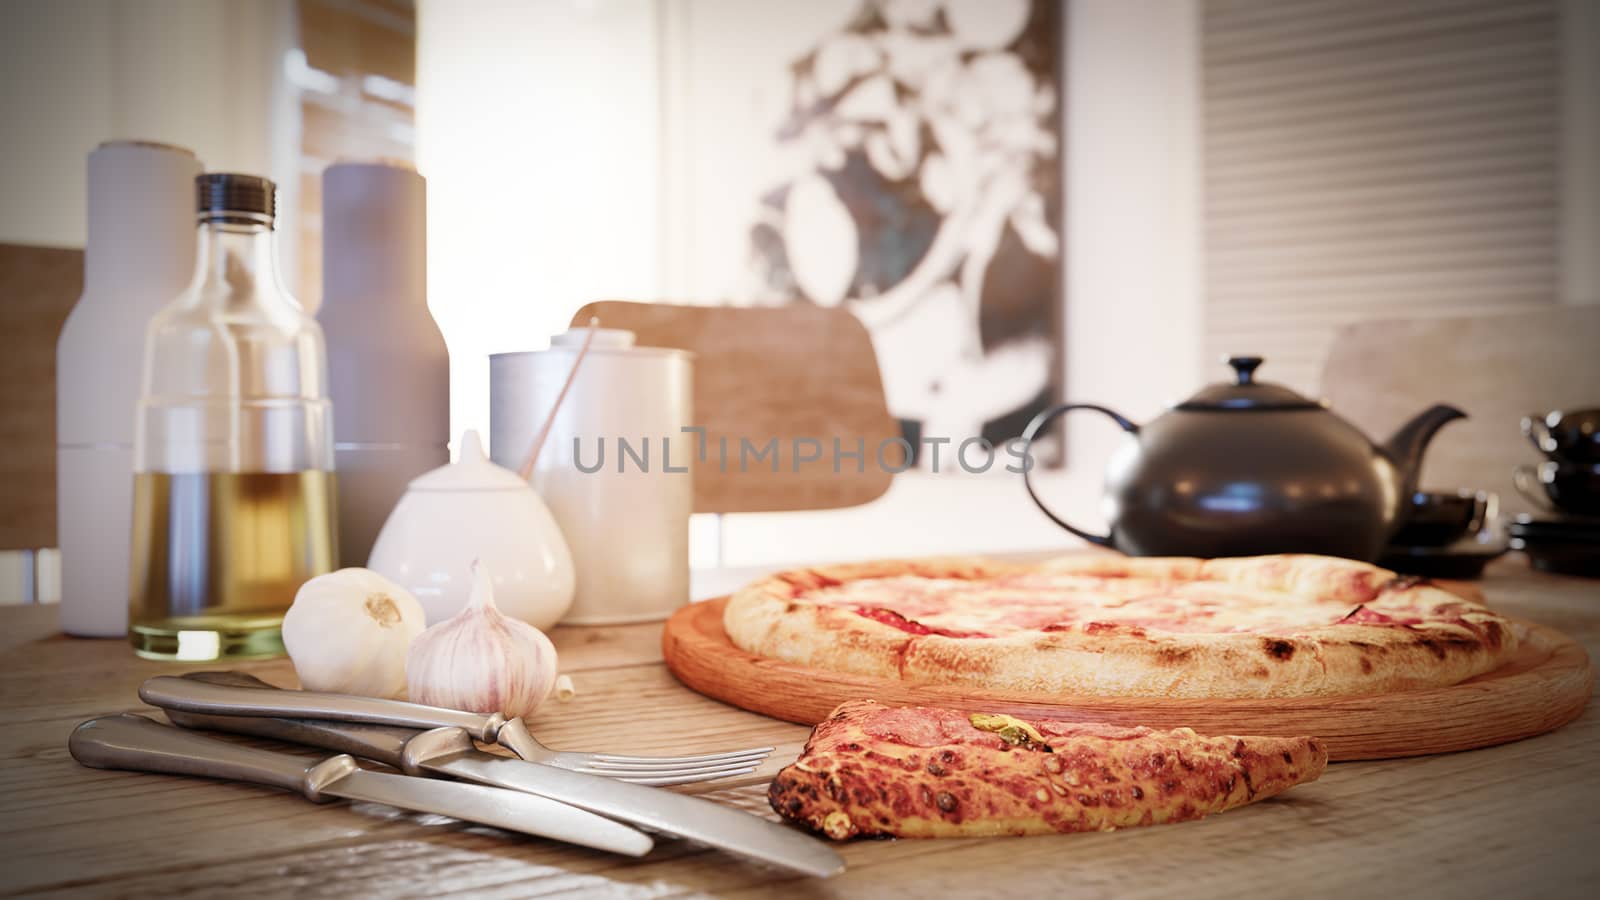 Hot pizza slice with melting cheese on a rustic wooden table close up photo by denisgo